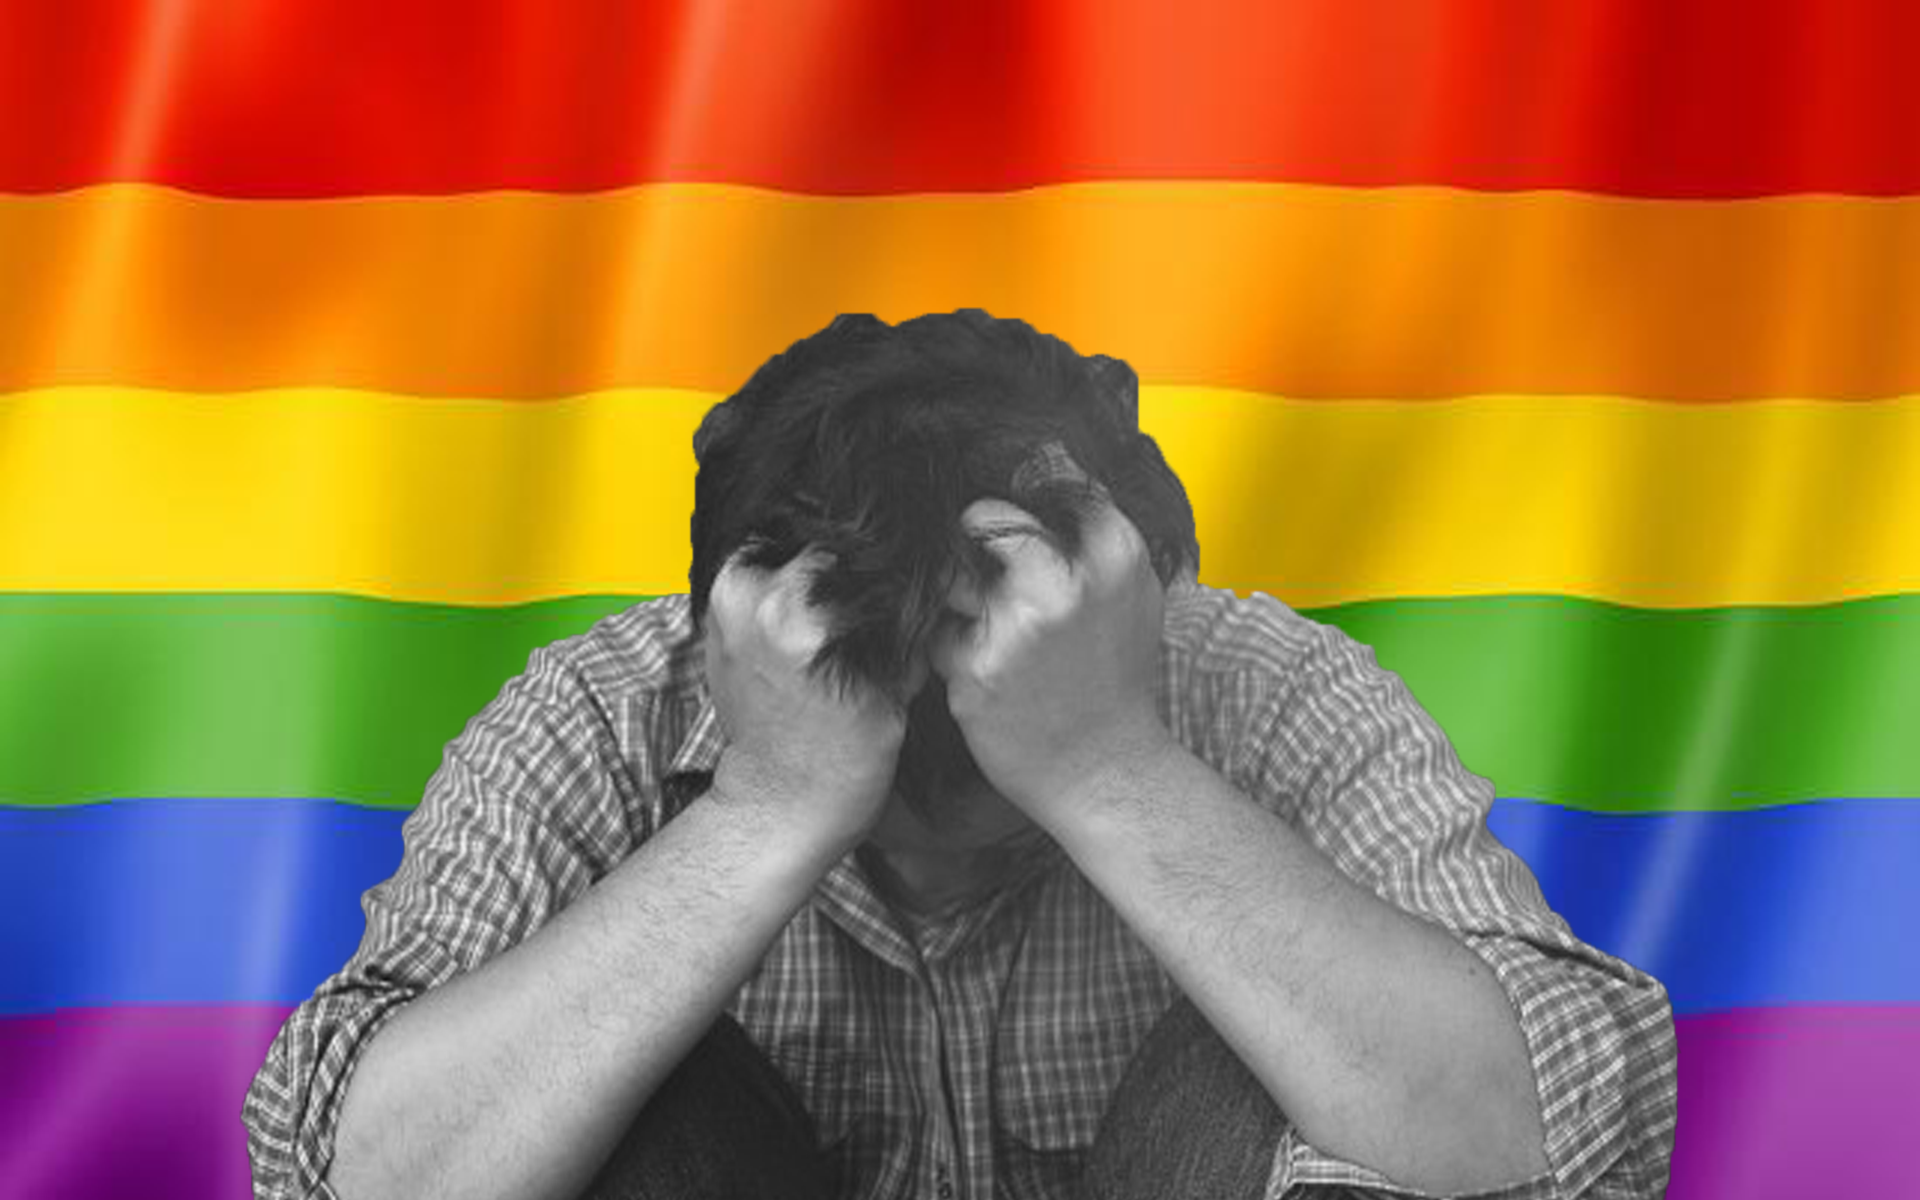 Tragic: Man Unable To Come Out As Gay After Calling "No Homo Infinity"